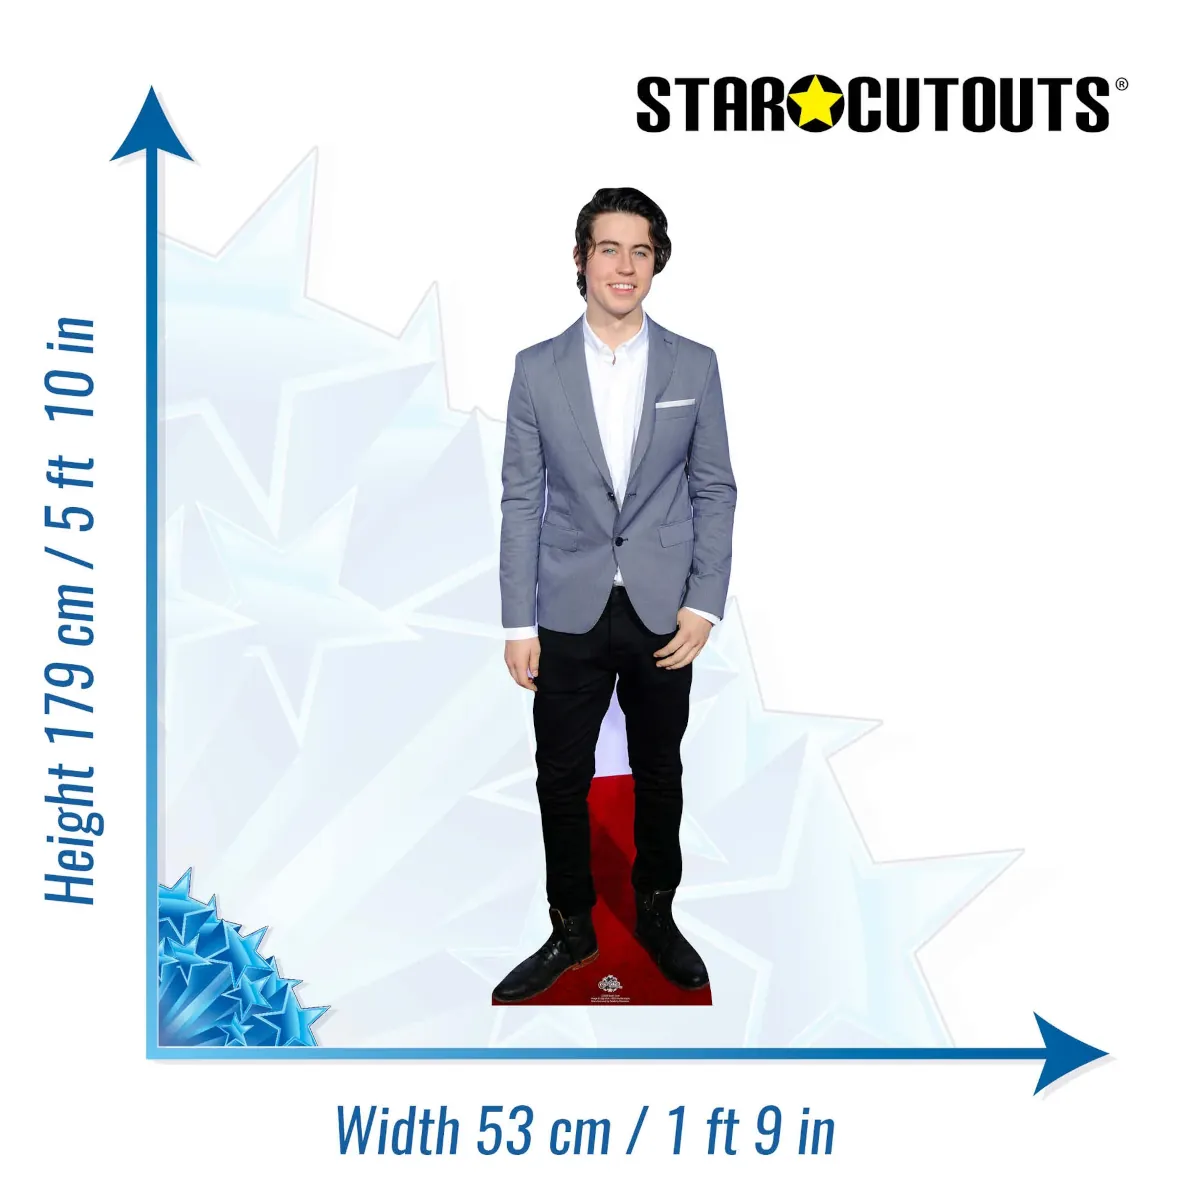 CS633 Nash Grier 'Red Carpet' (Internet Personality) Lifesize Cardboard Cutout Standee Size